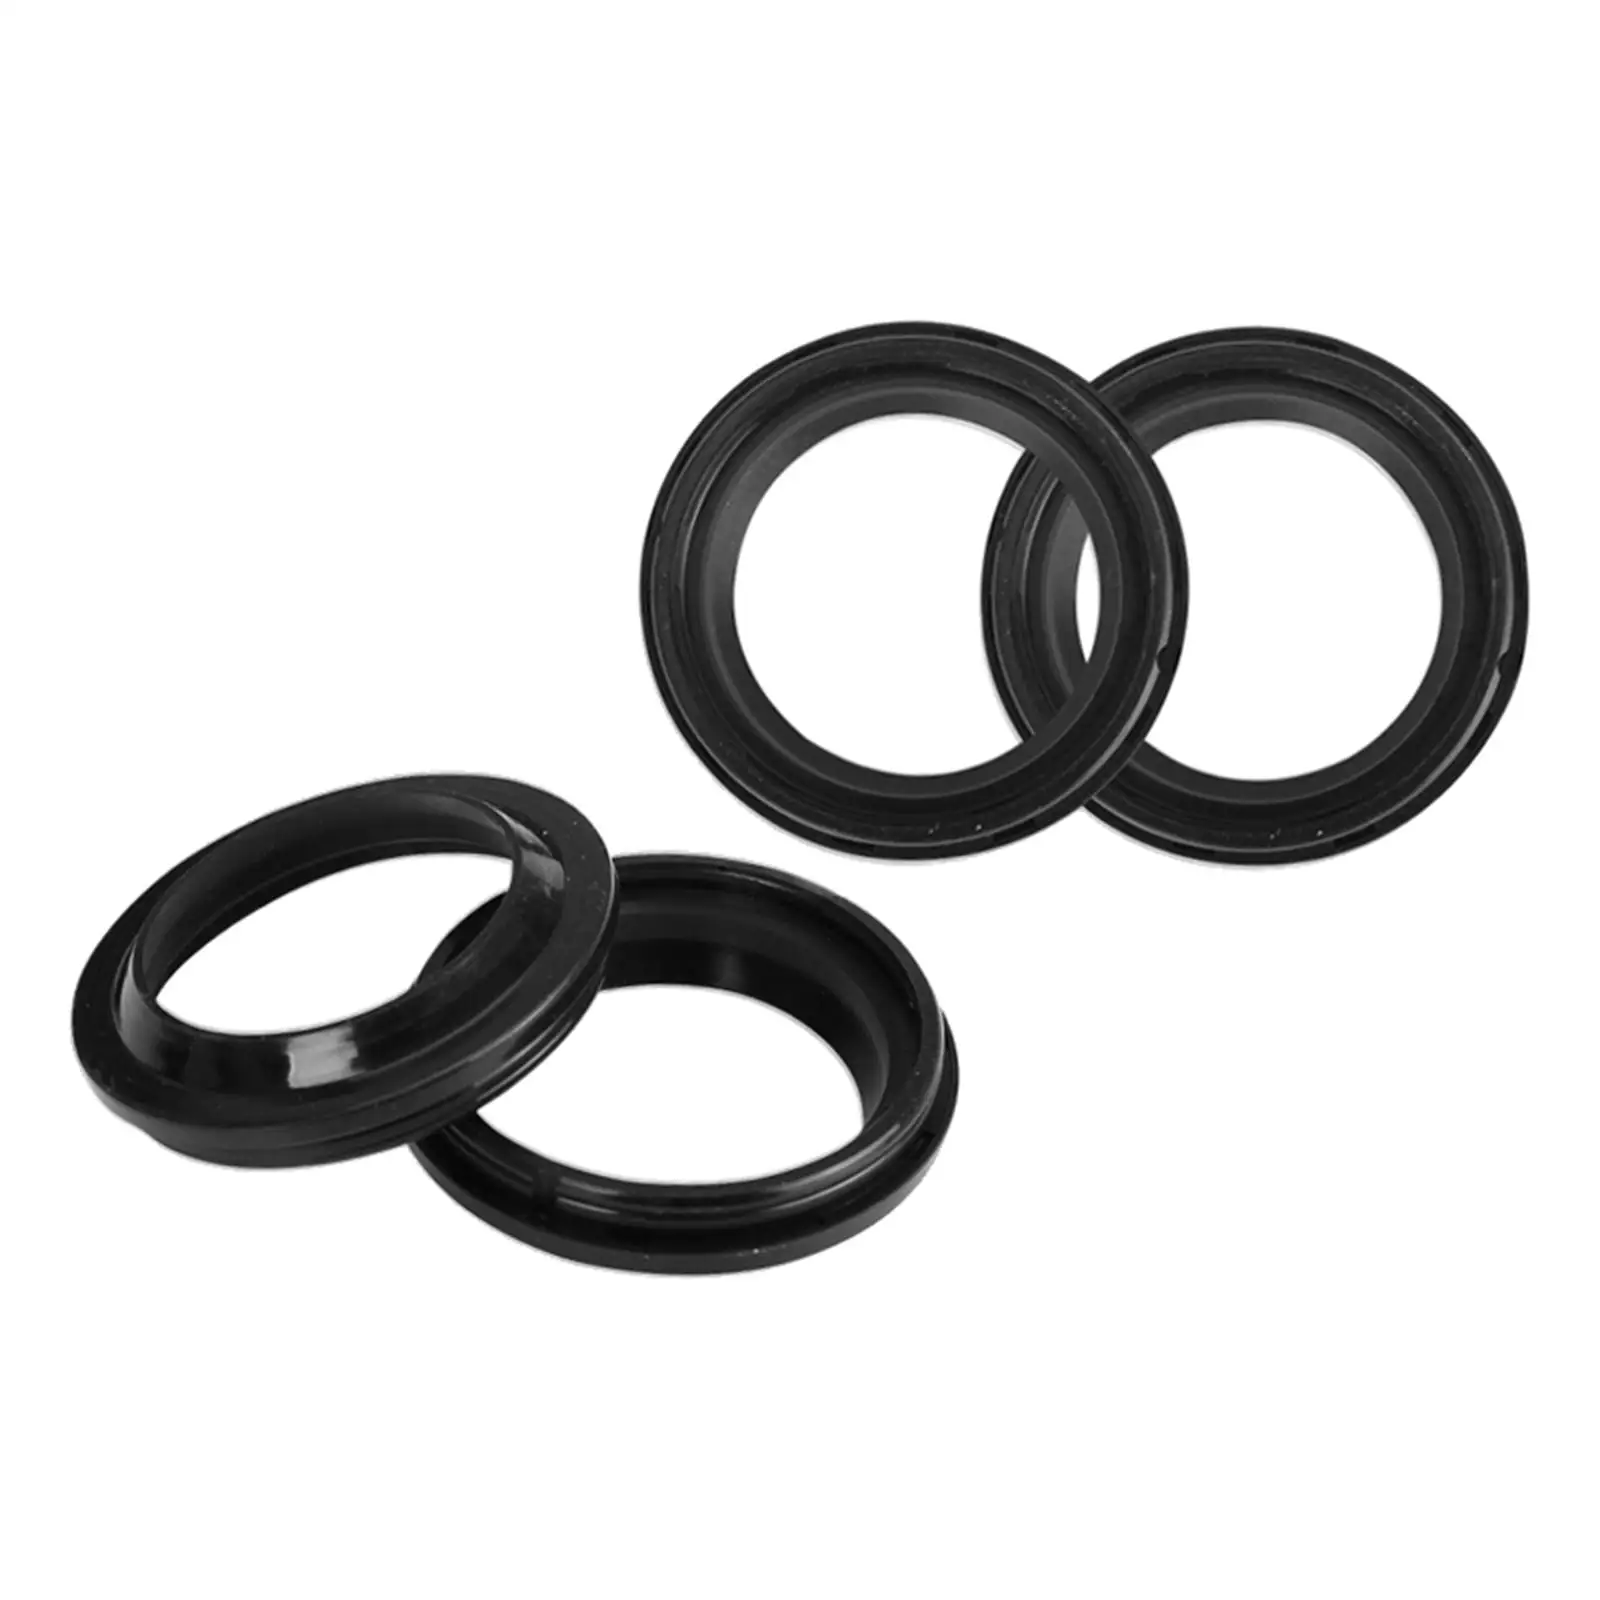 Motorcycle Front Fork Damper Shock Absorber Oil Dust Seal Set Kit 41x53x8/10.5mm For Yamaha XJR400 FZ400 Racing Star